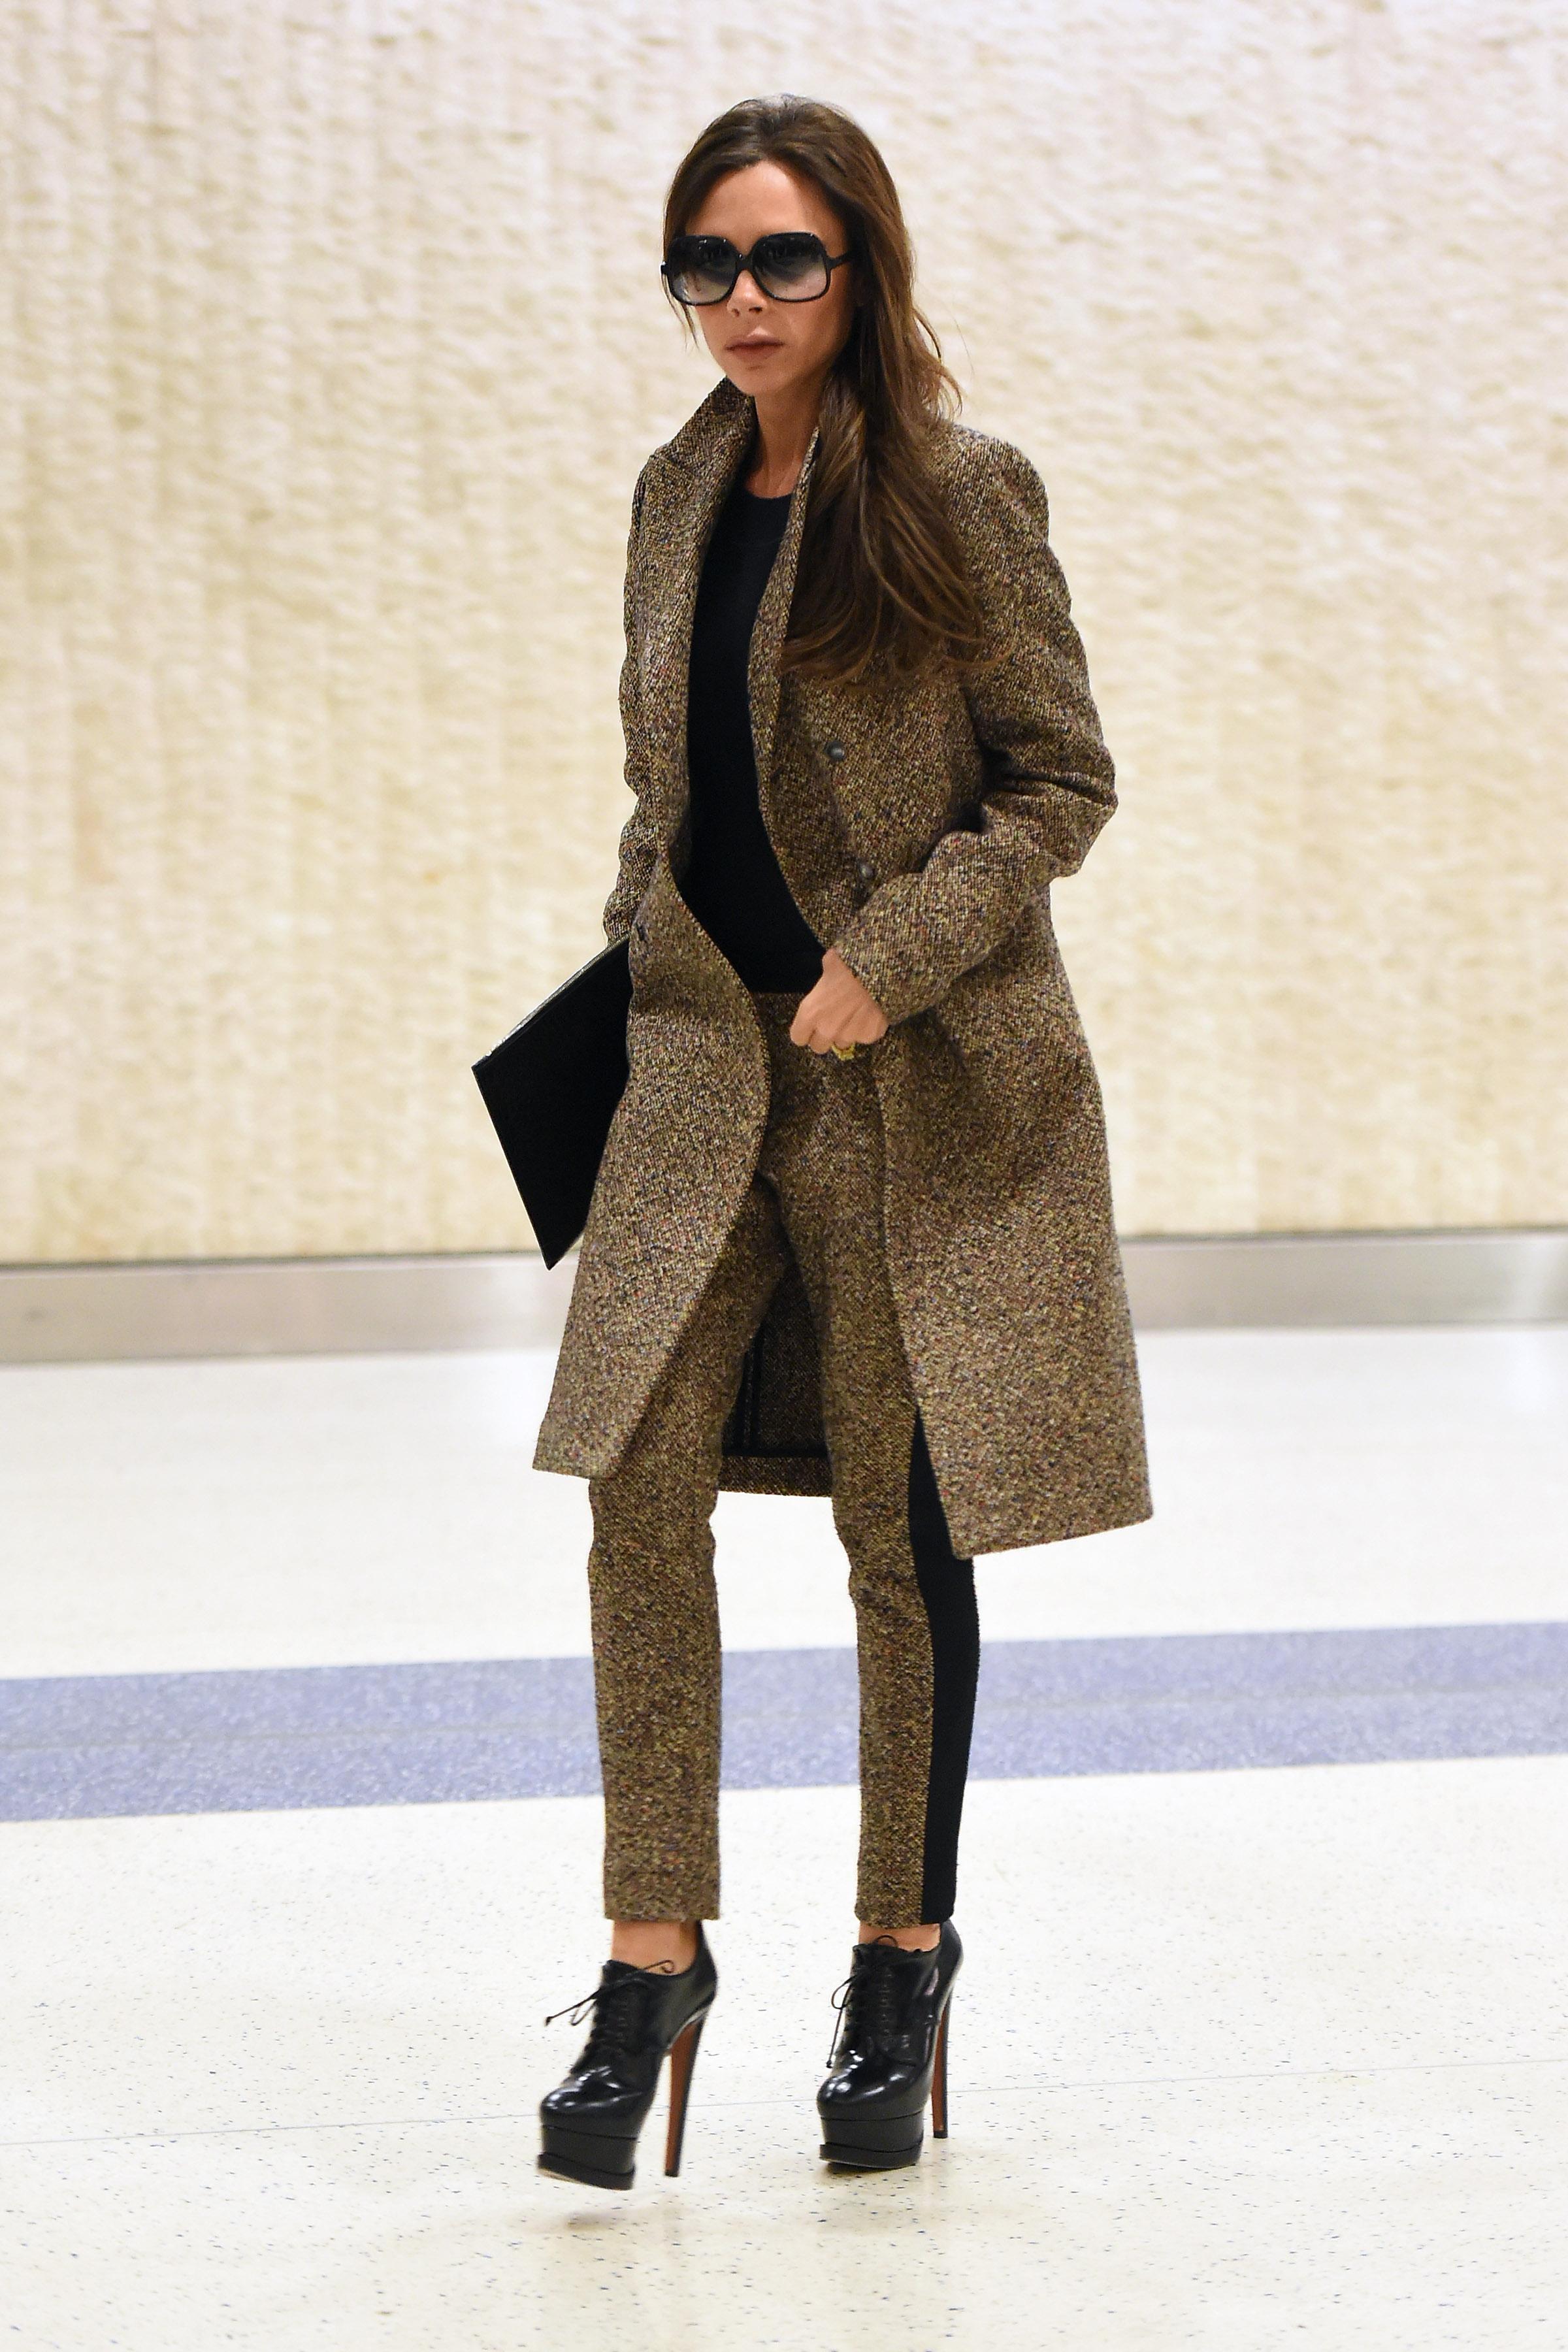 Pouty Posh! Victoria Beckham Arrives In New York City Alone Amid David ...